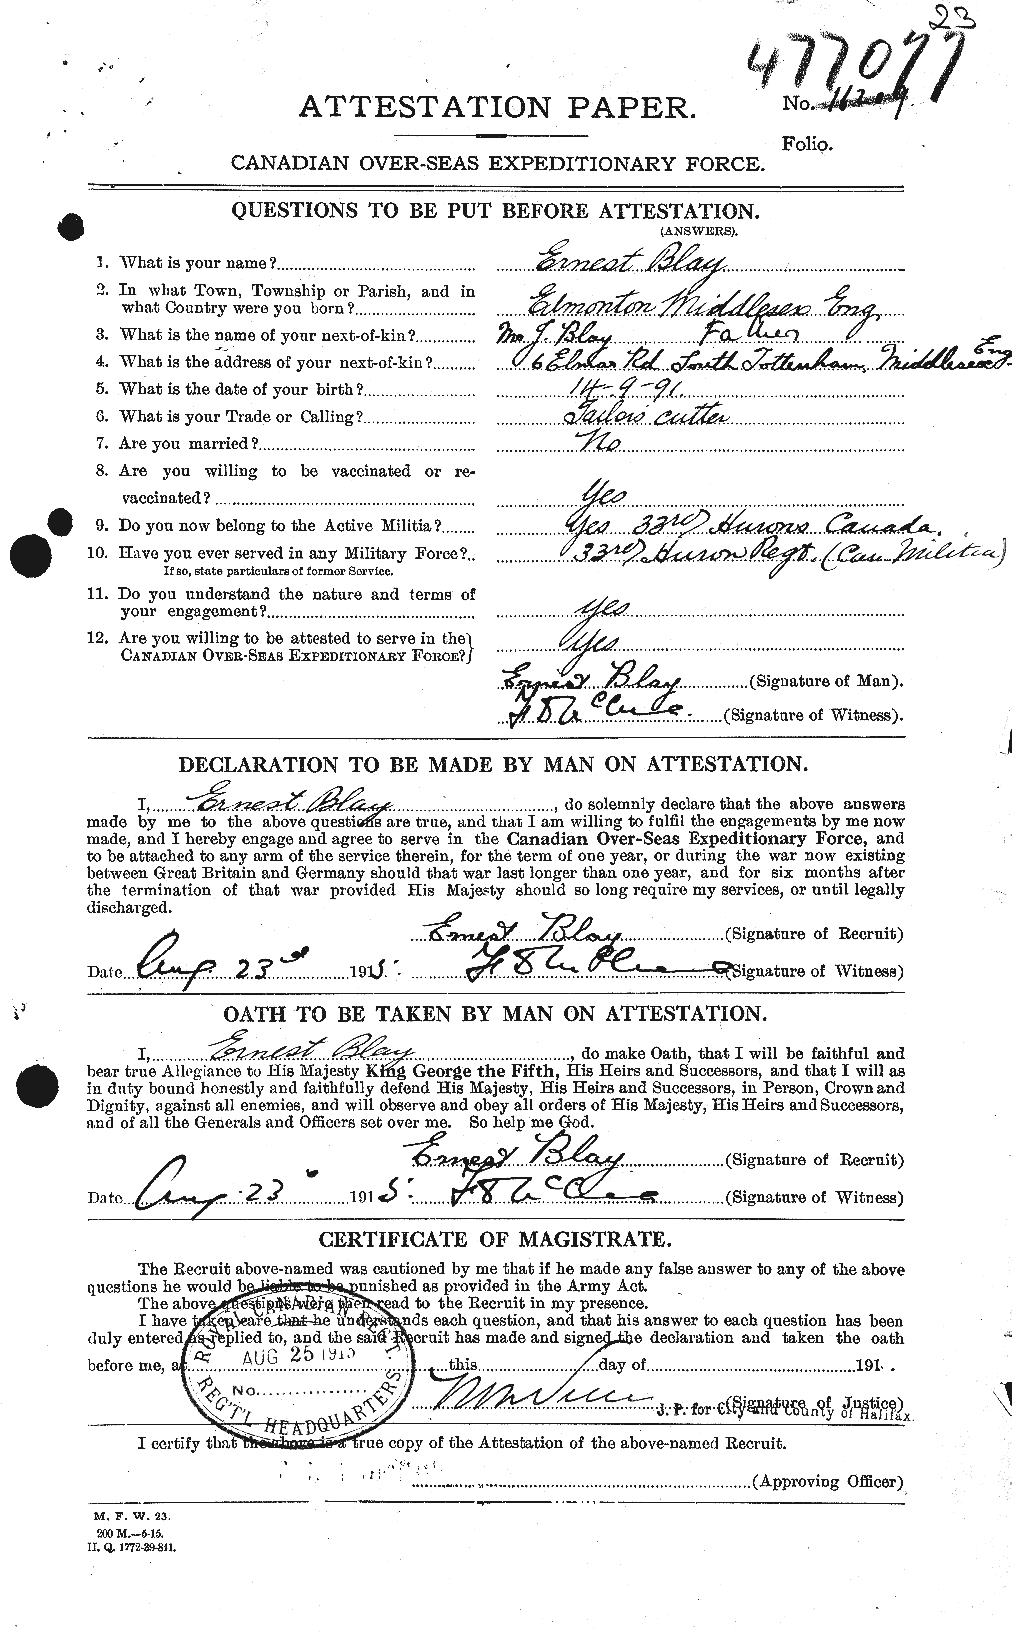 Personnel Records of the First World War - CEF 247844a